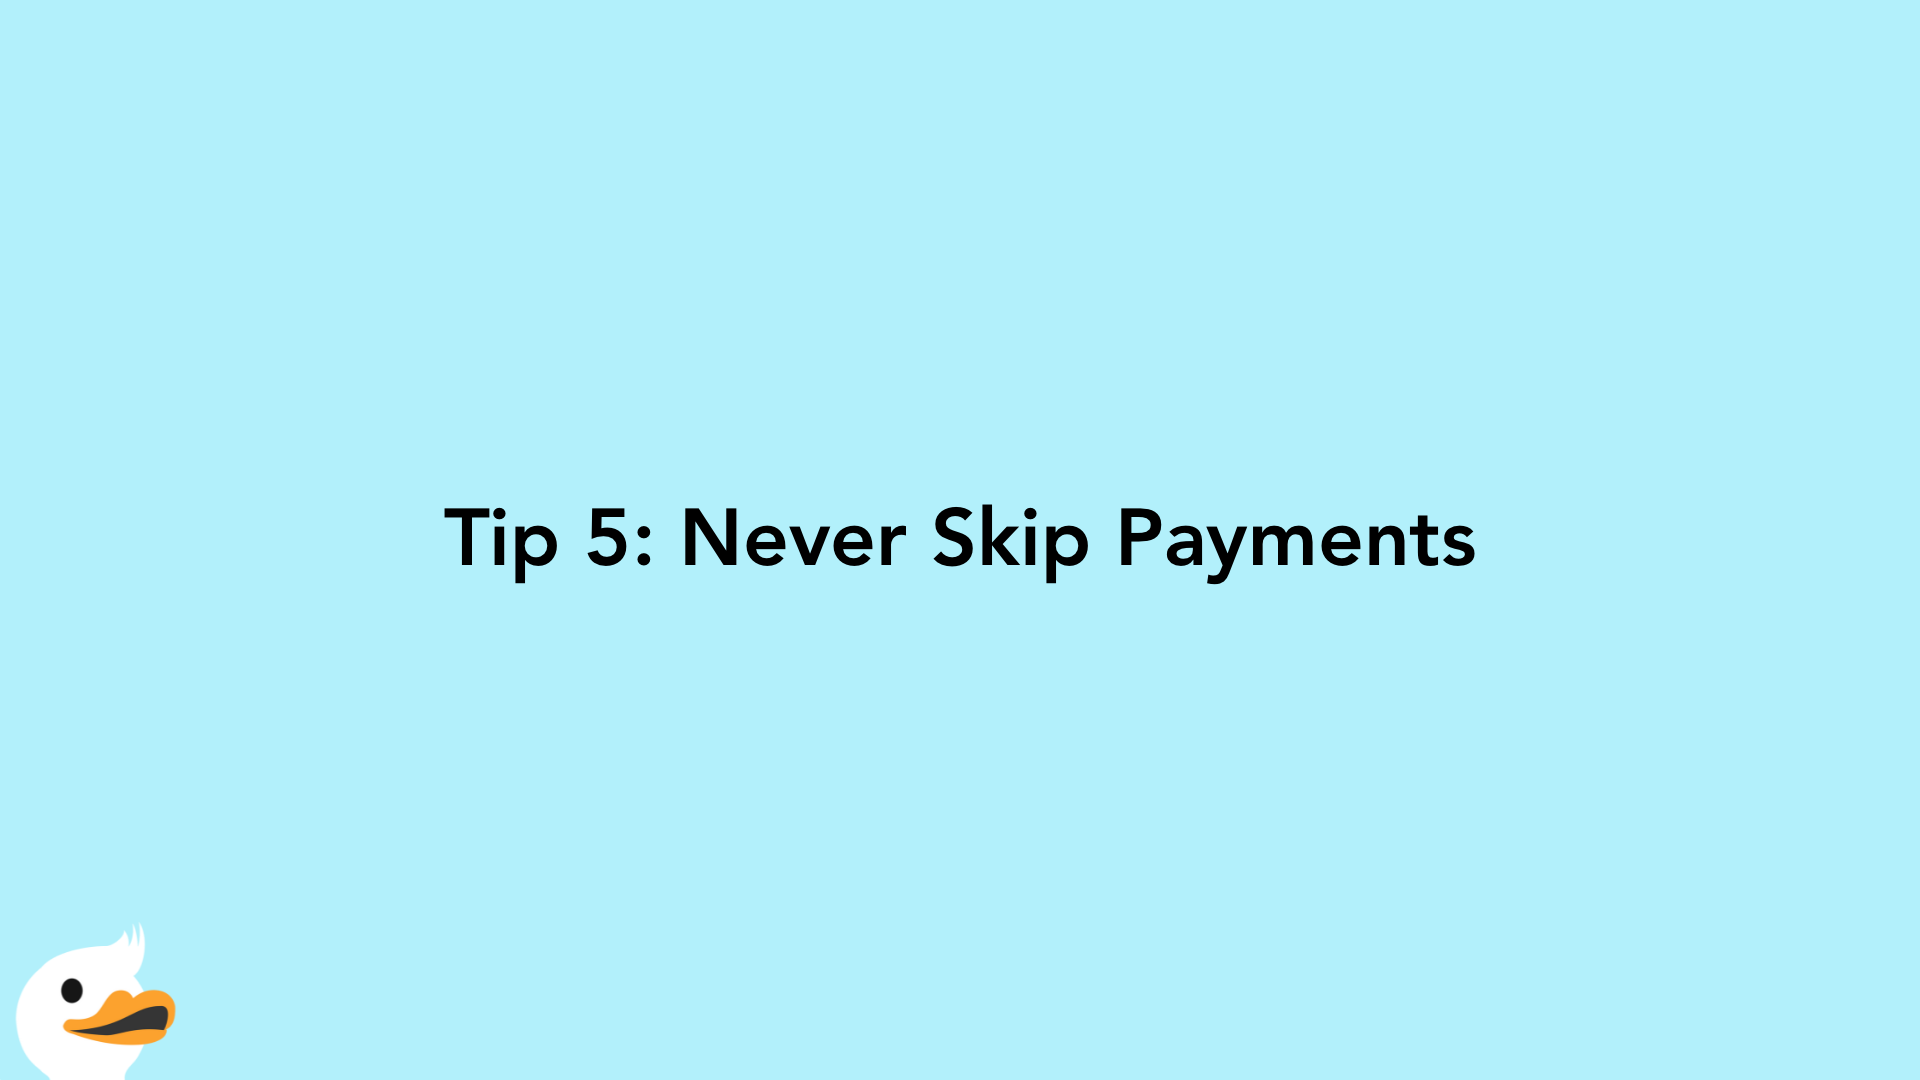 Tip 5: Never Skip Payments